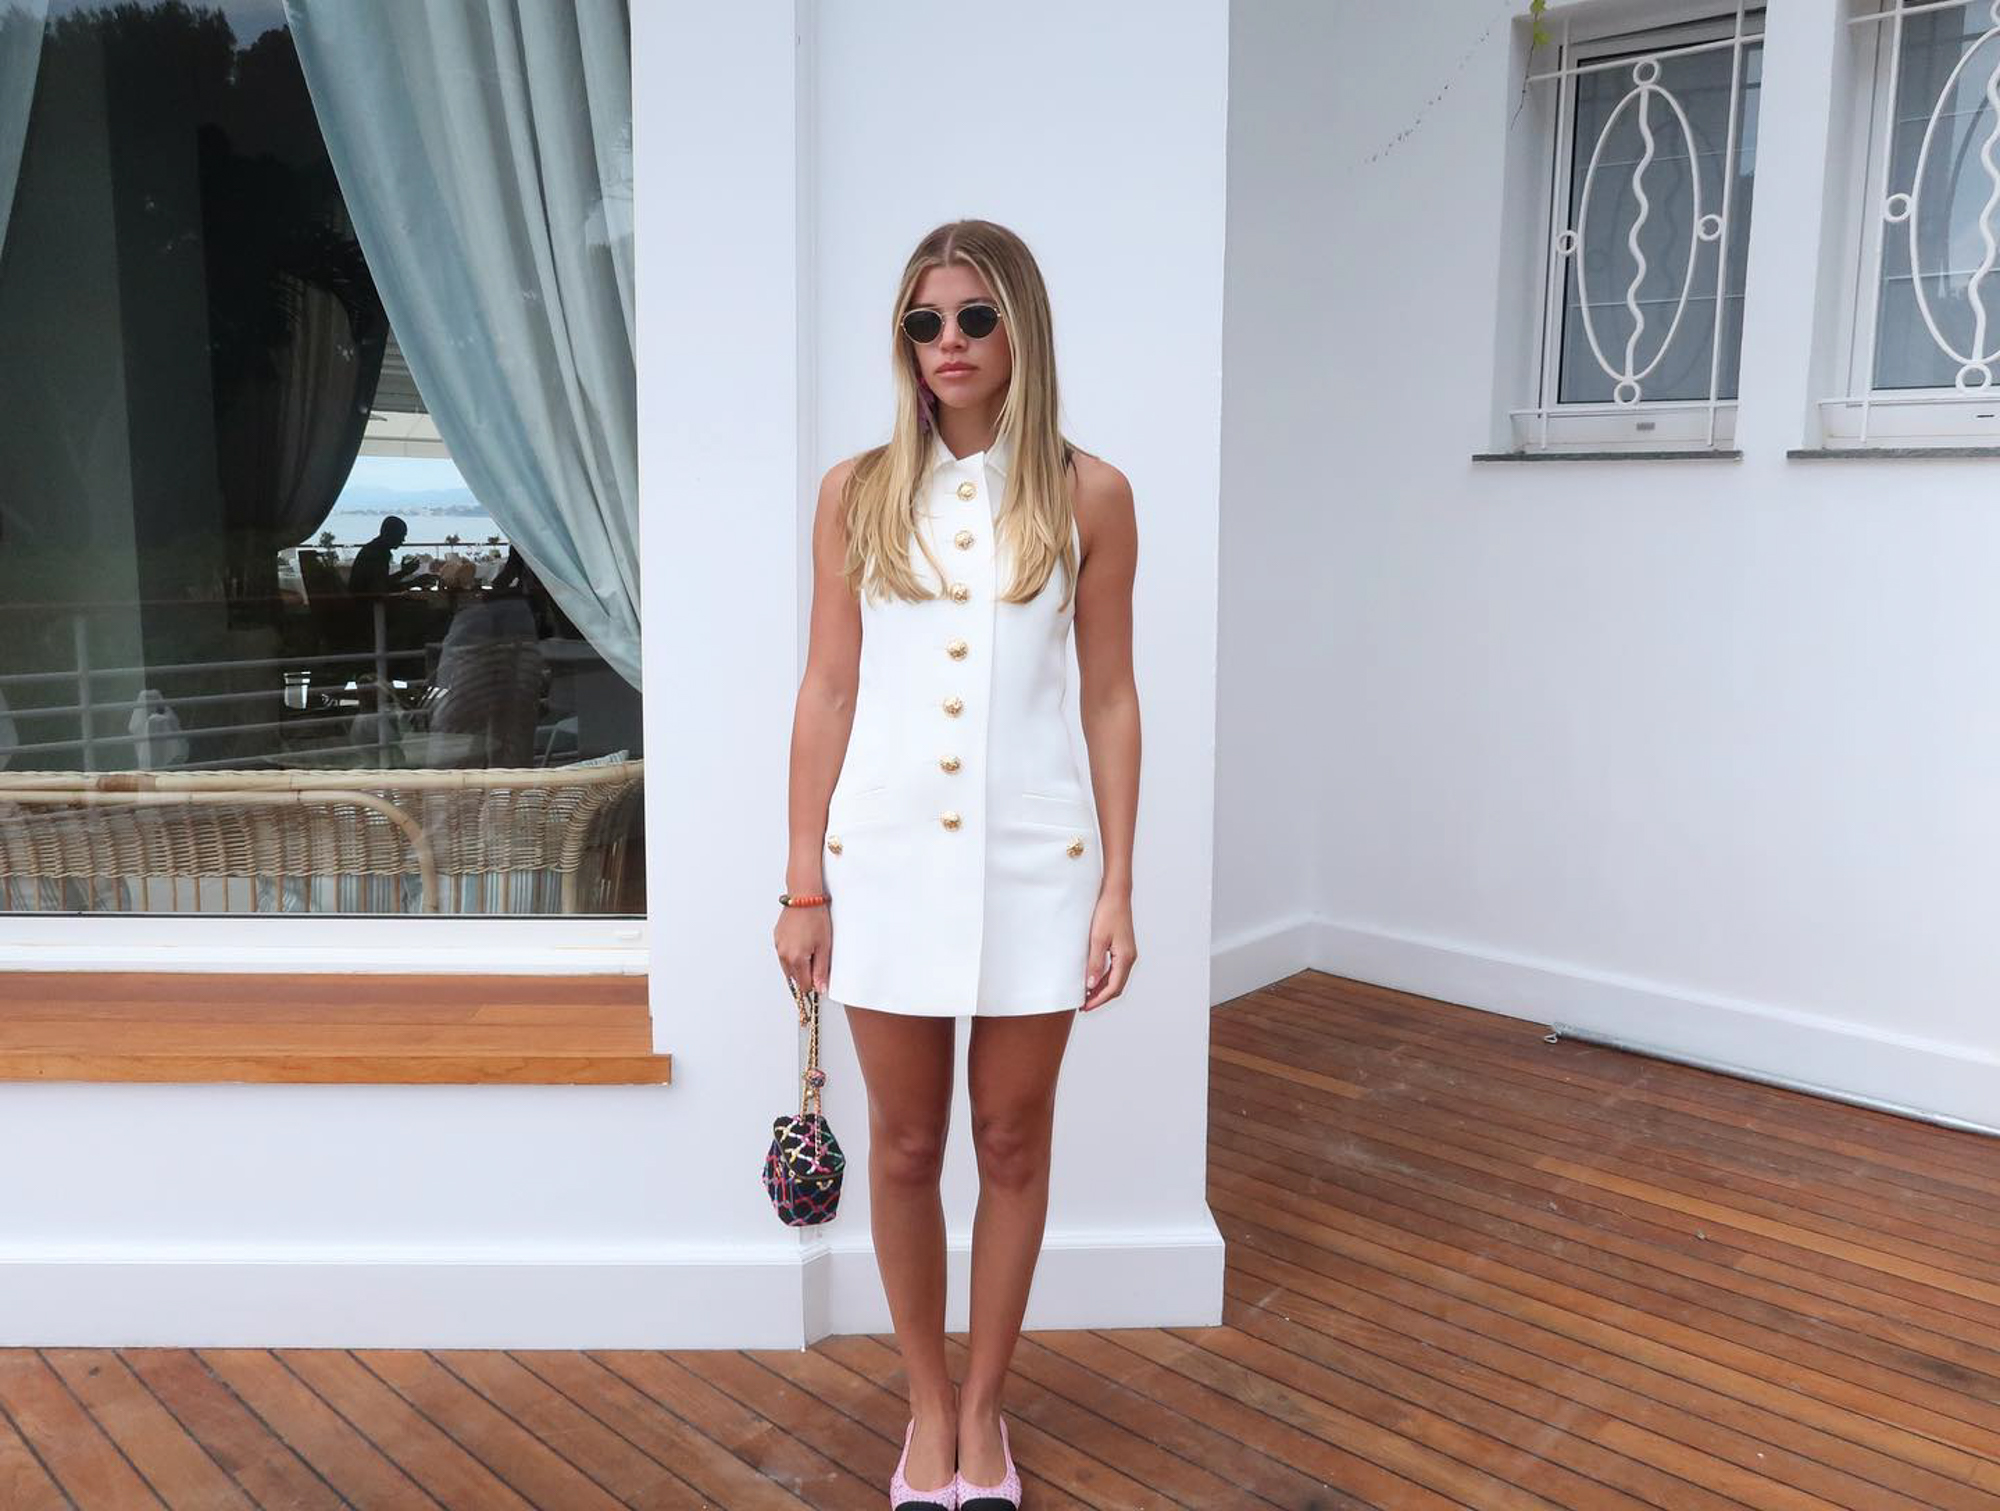 Sofia Richie in a white buttoned dress